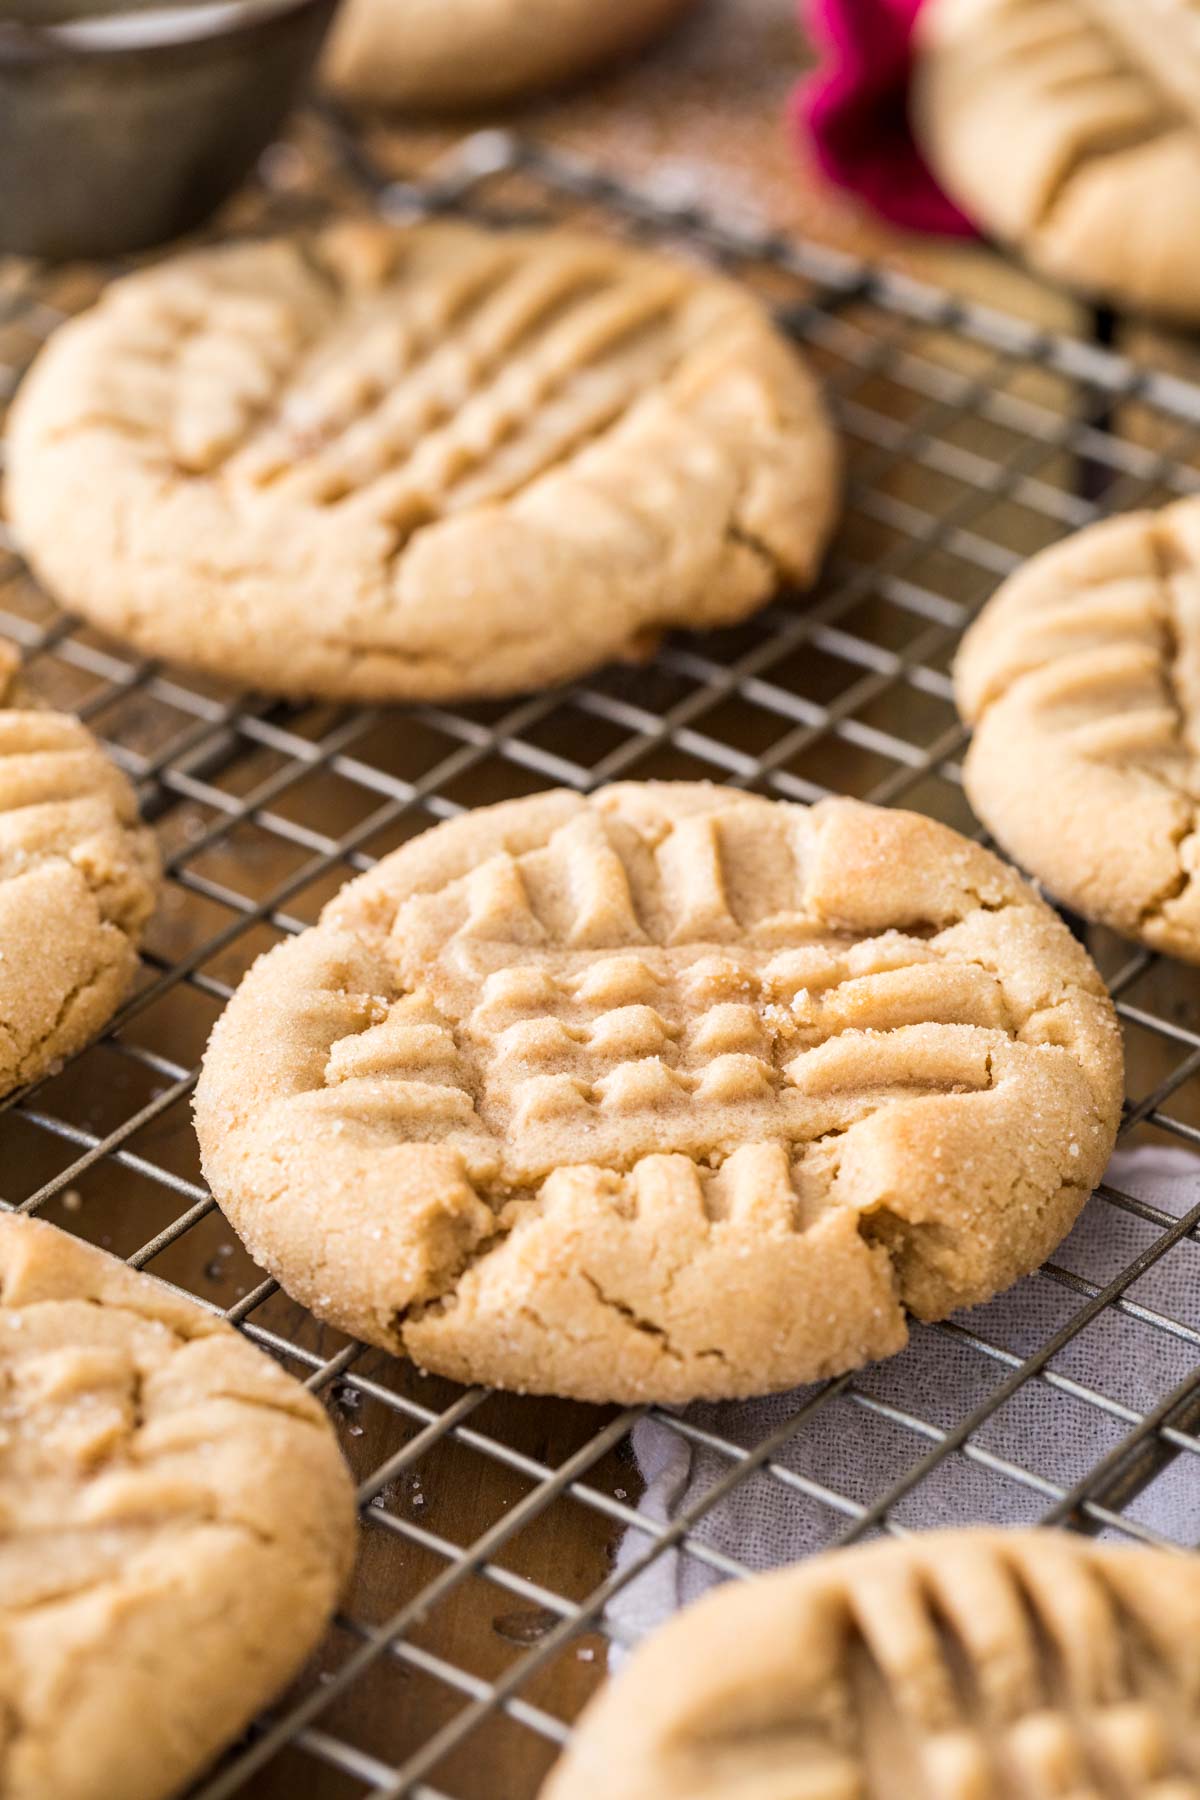 Peanut butter cookies cooling on a cooling rack.